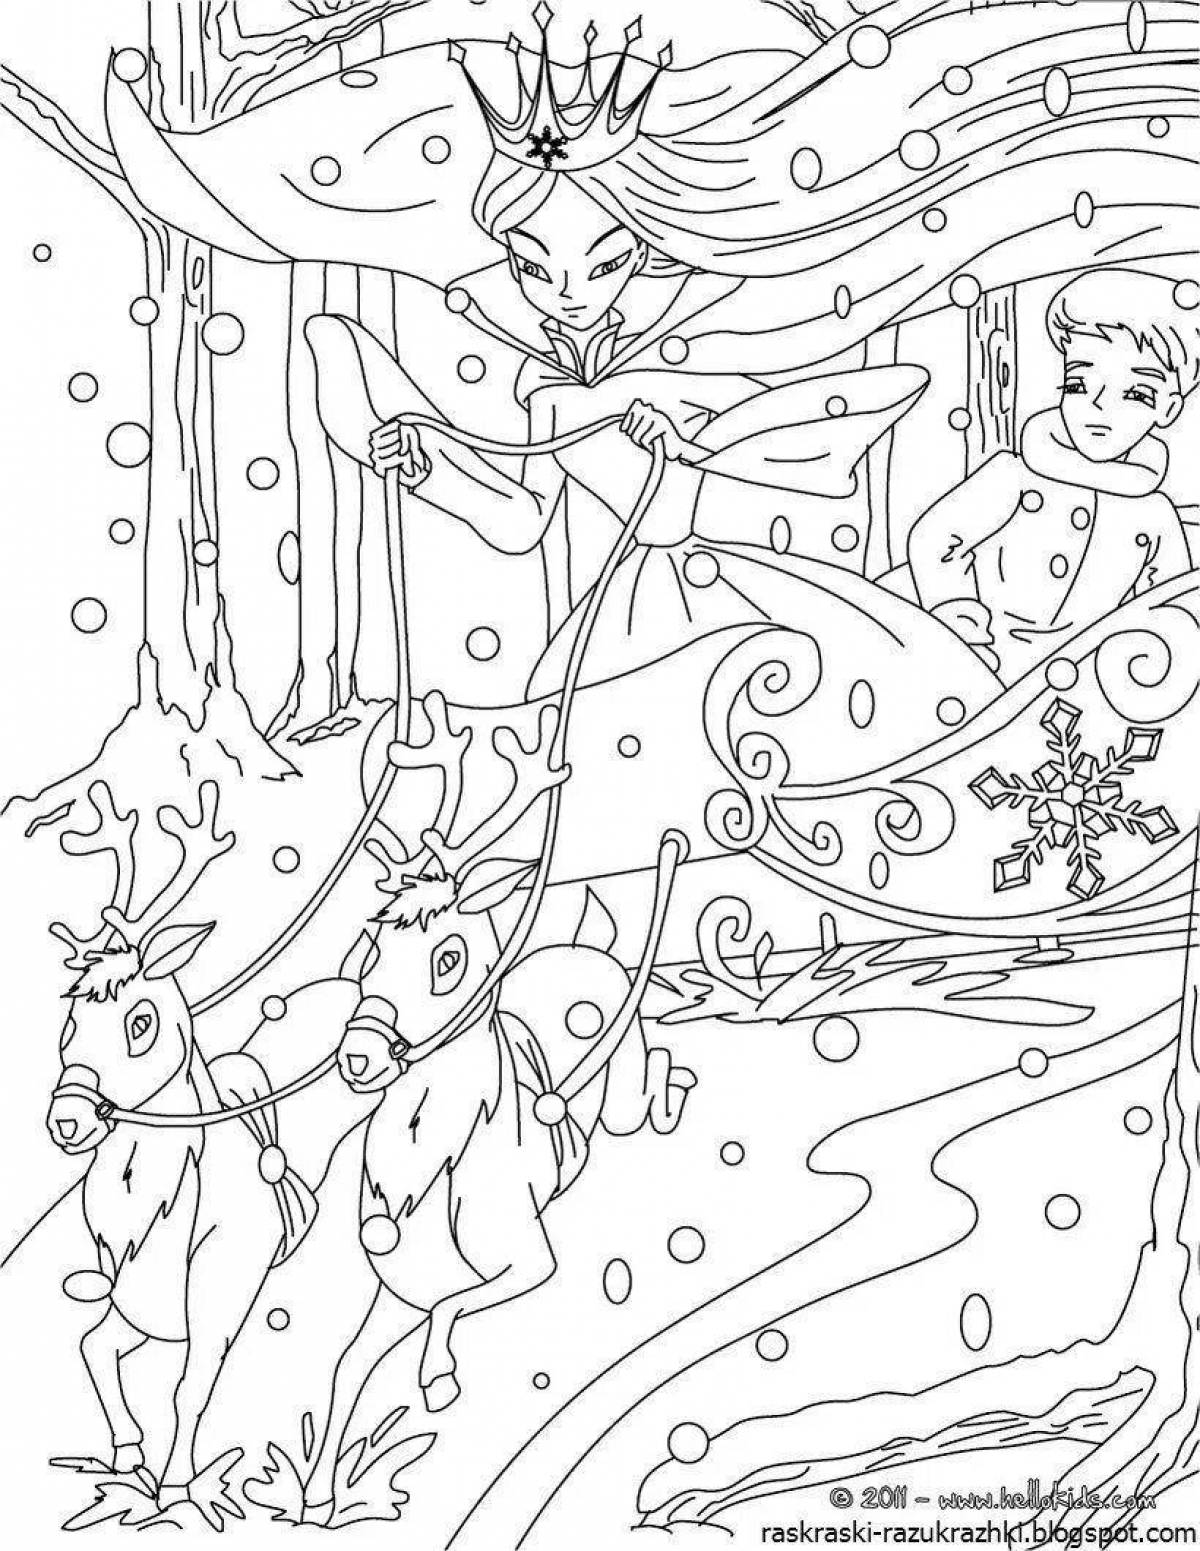 Bright coloring fairy tale about the snow queen